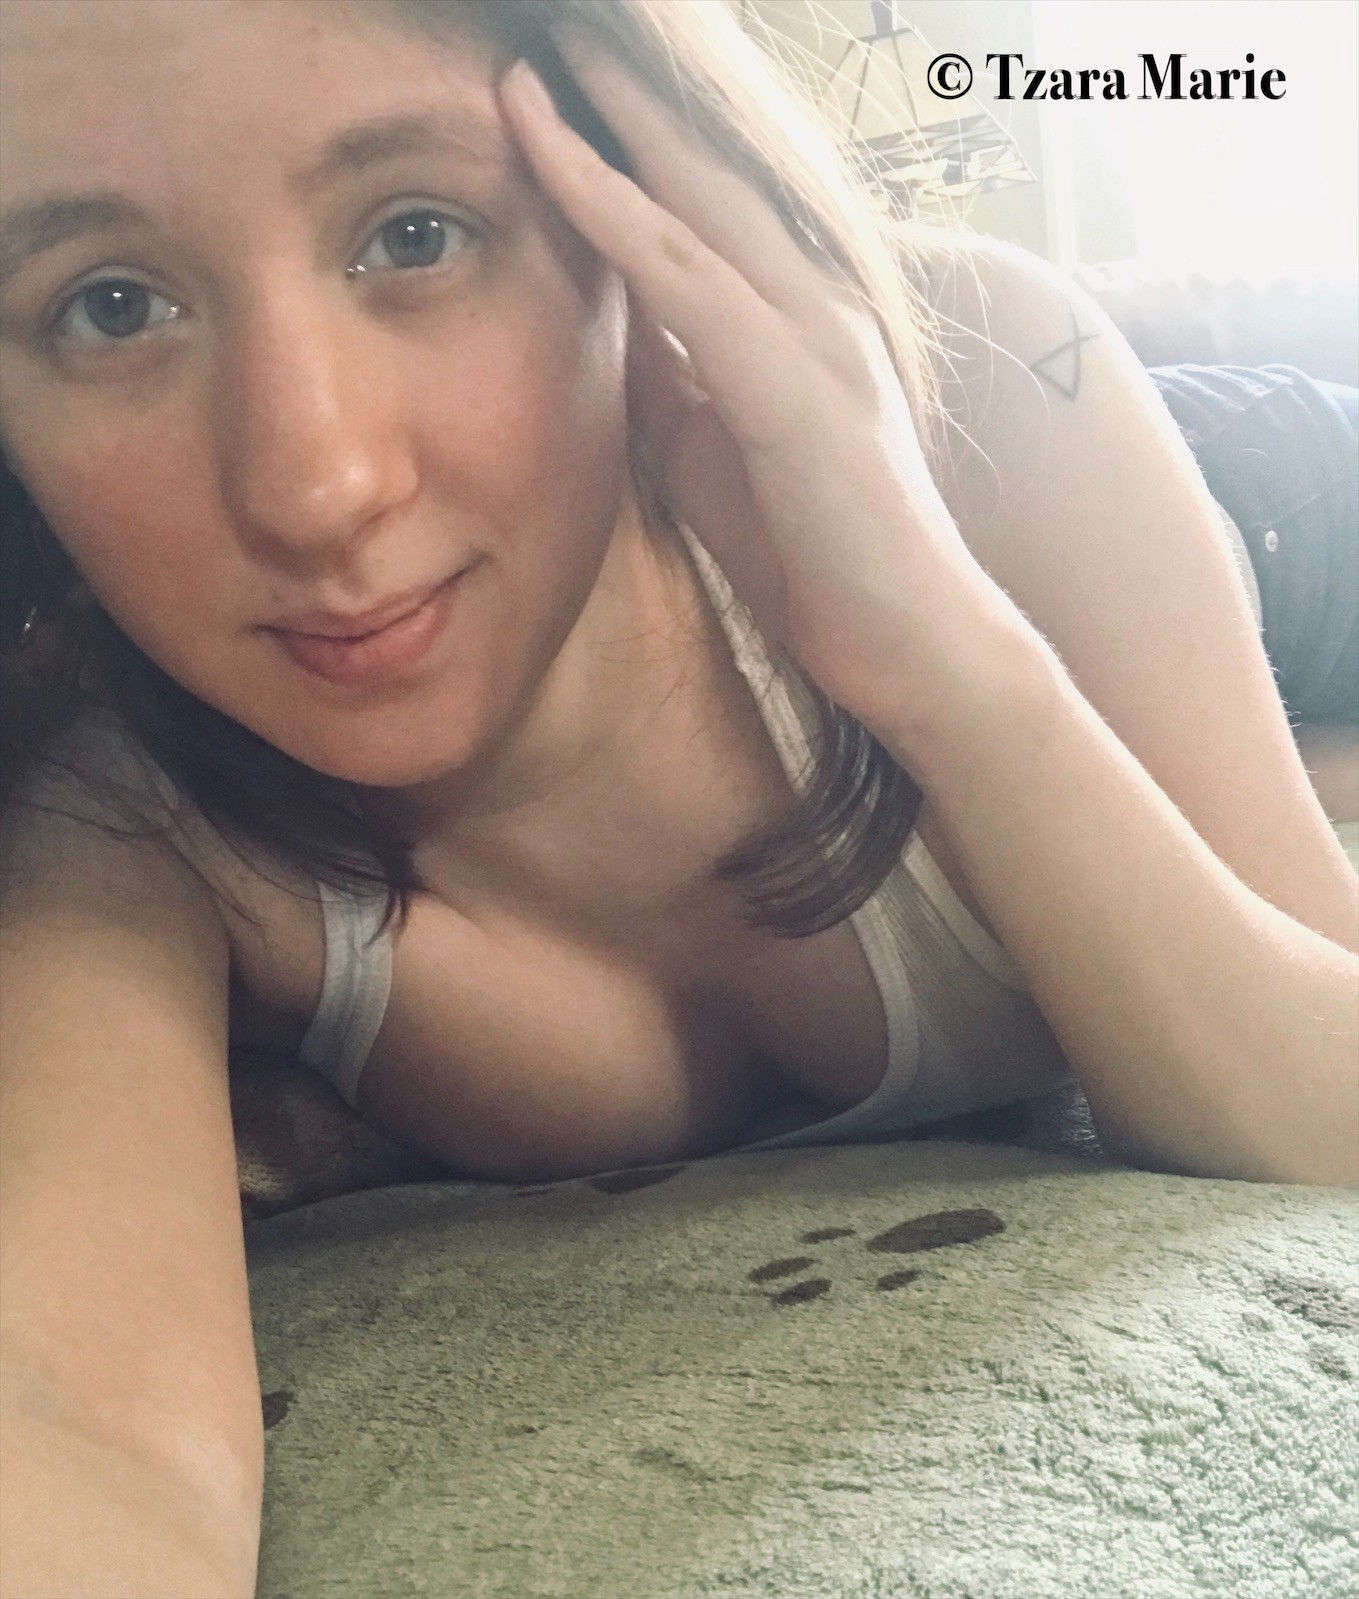 Photo by Tzara Marie with the username @TzaraMarie, who is a star user,  May 24, 2020 at 7:56 PM. The post is about the topic Amateurs and the text says 'Enjoying the long weekend playing with myself and playing some video games... like & share if you wish you were here too 😇'